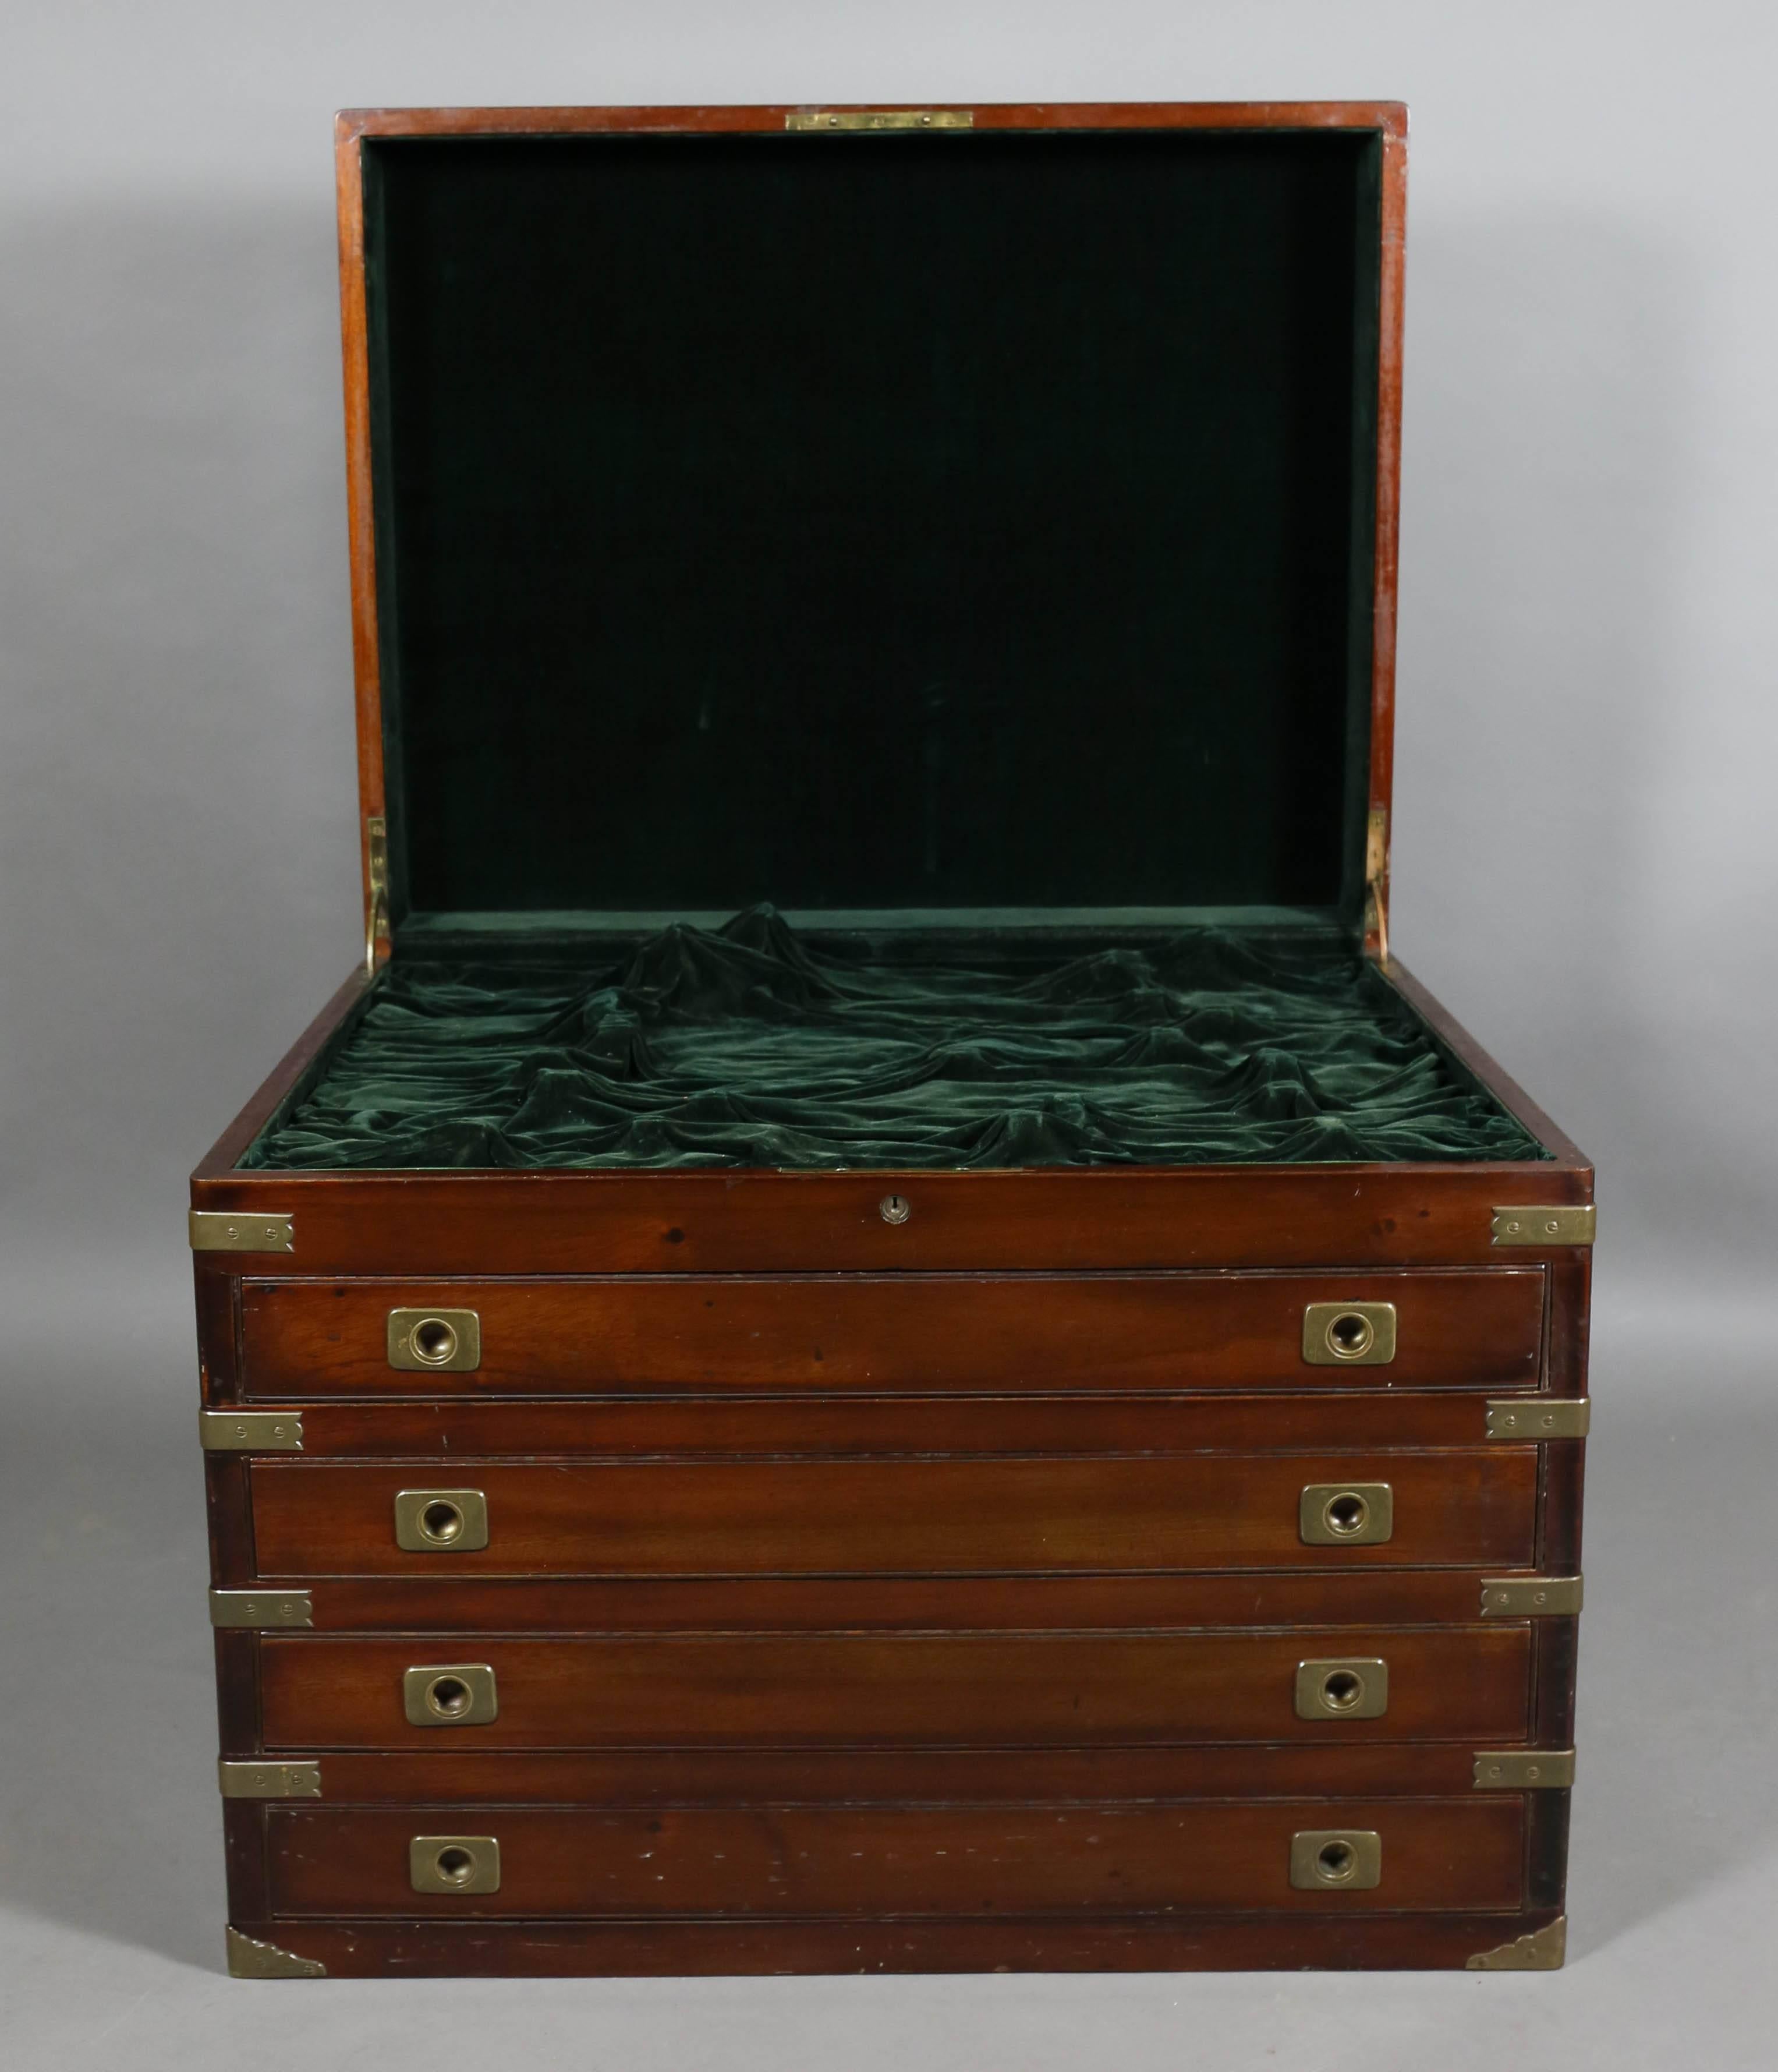 Velvet lined, with four drawers and brass details.